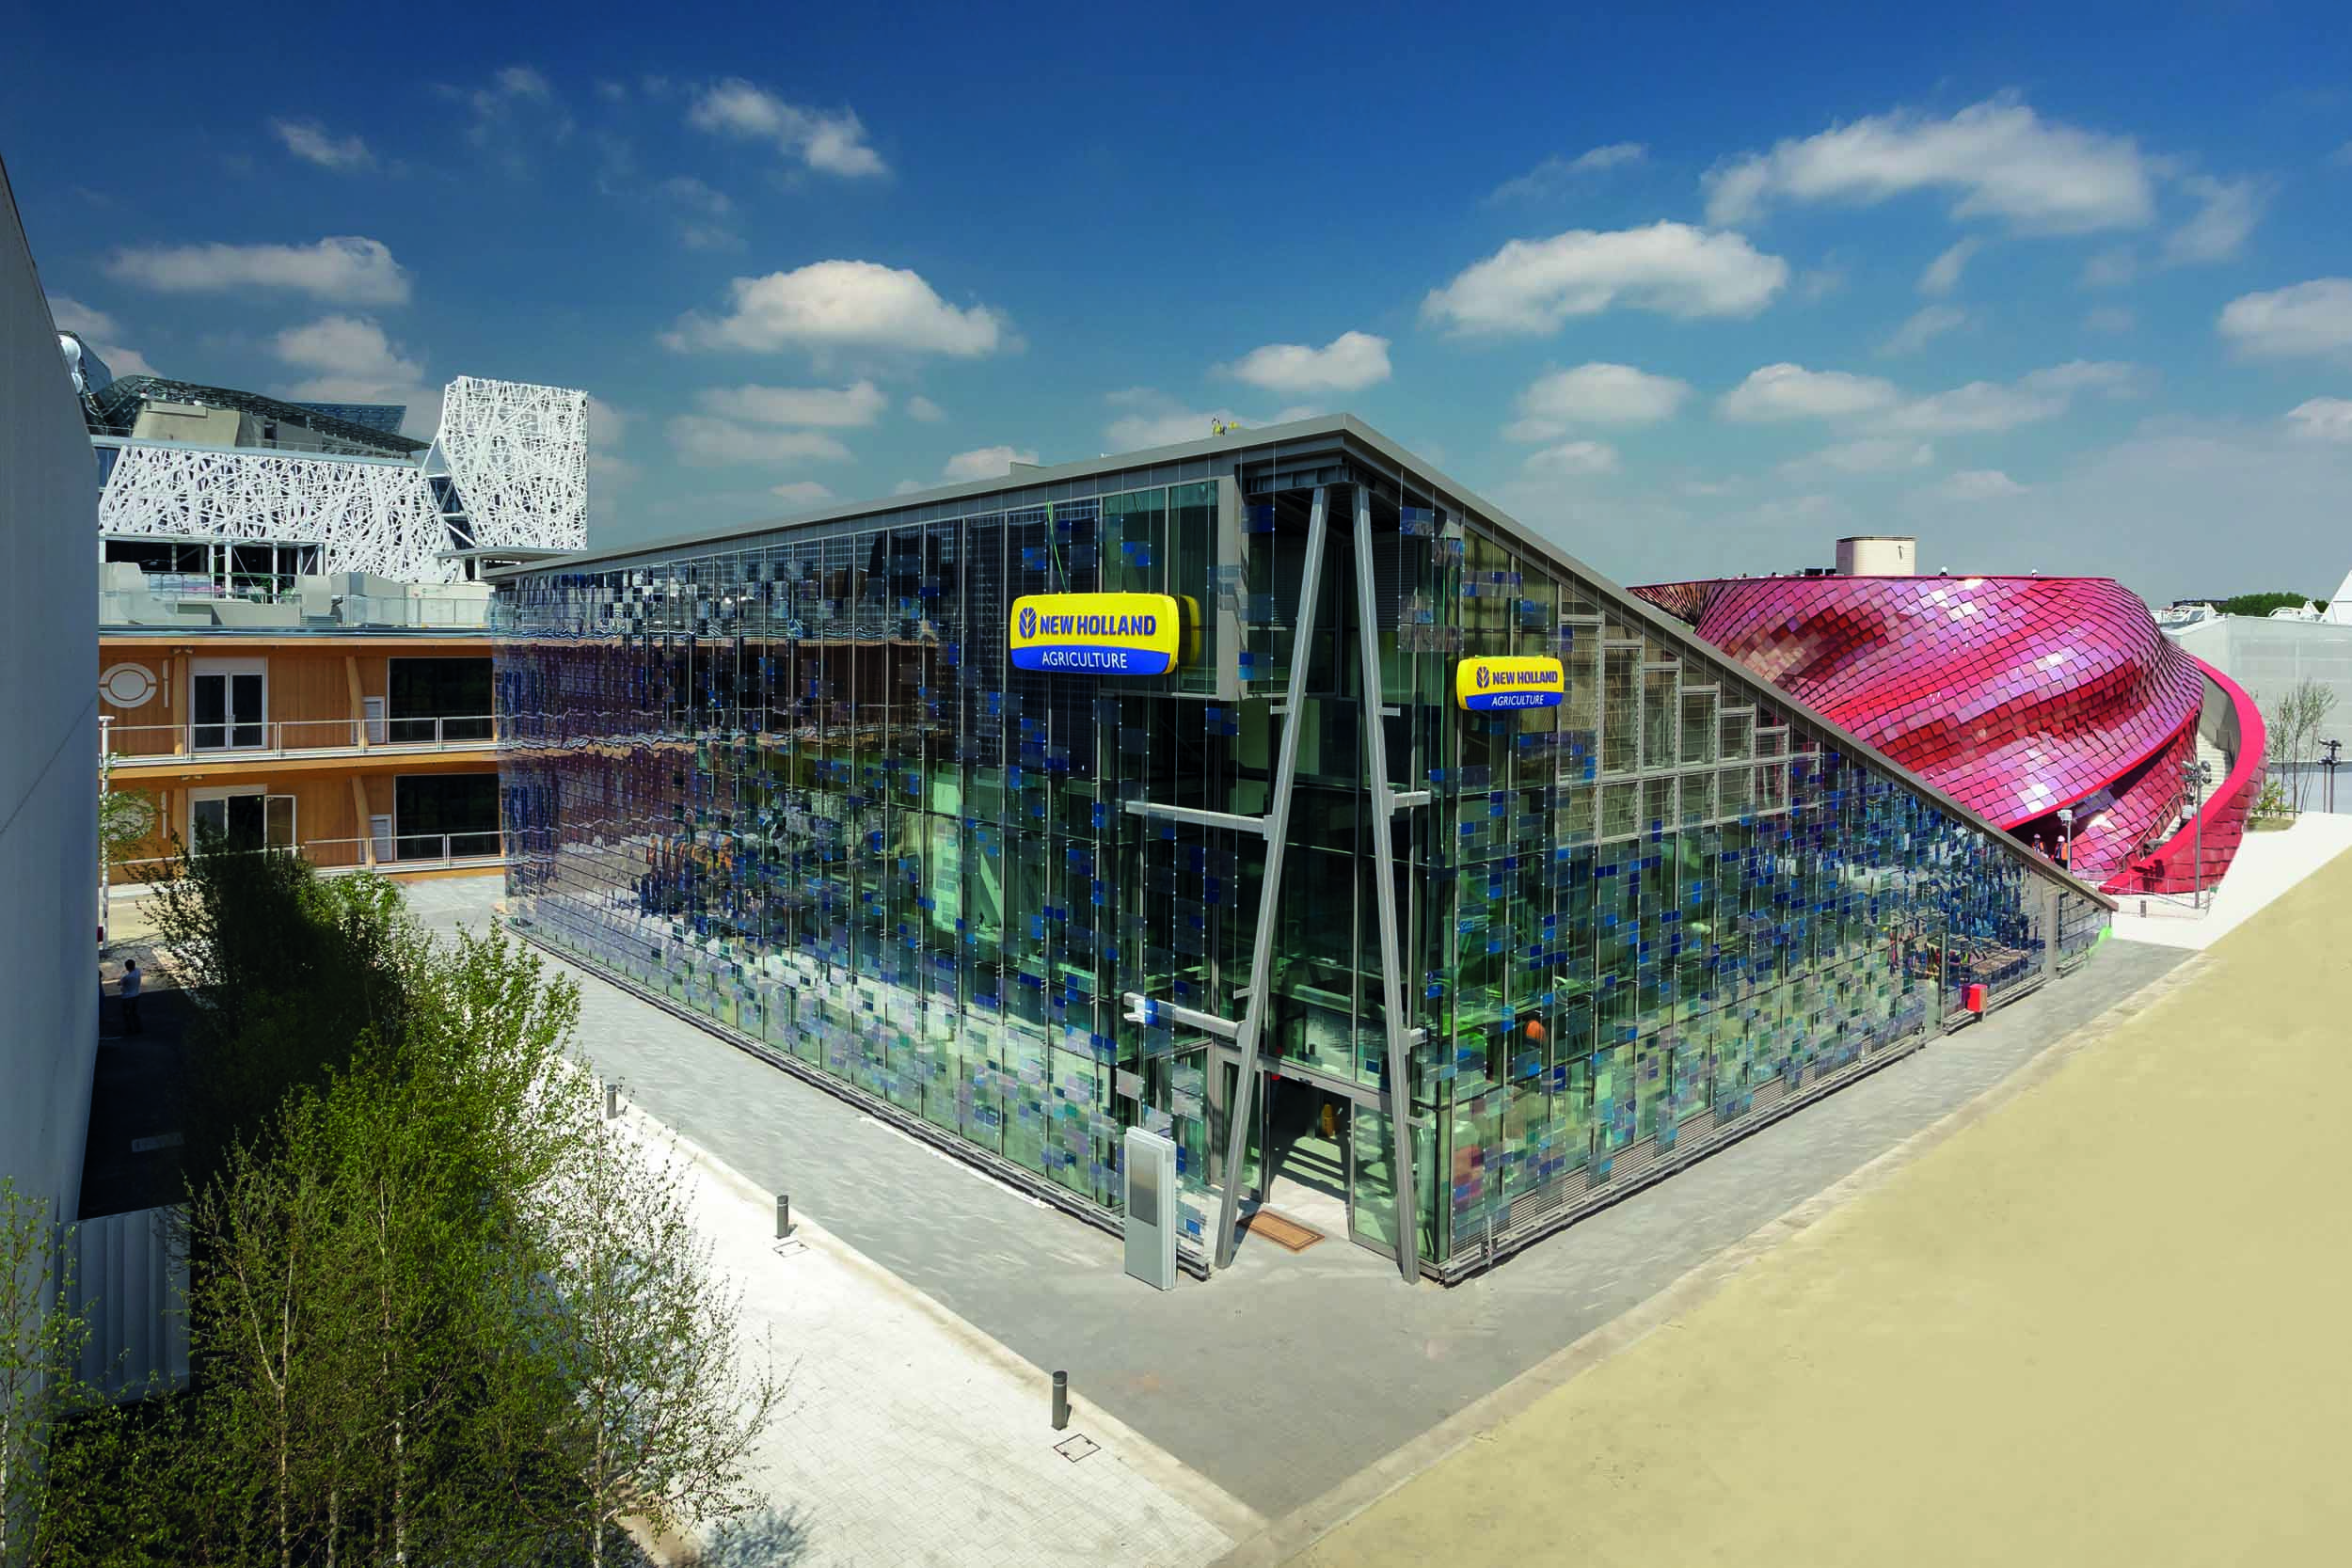 NEW HOLLAND AGRICULTURE PAVILION OPENS ITS DOORS AT EXPO MILANO 2015